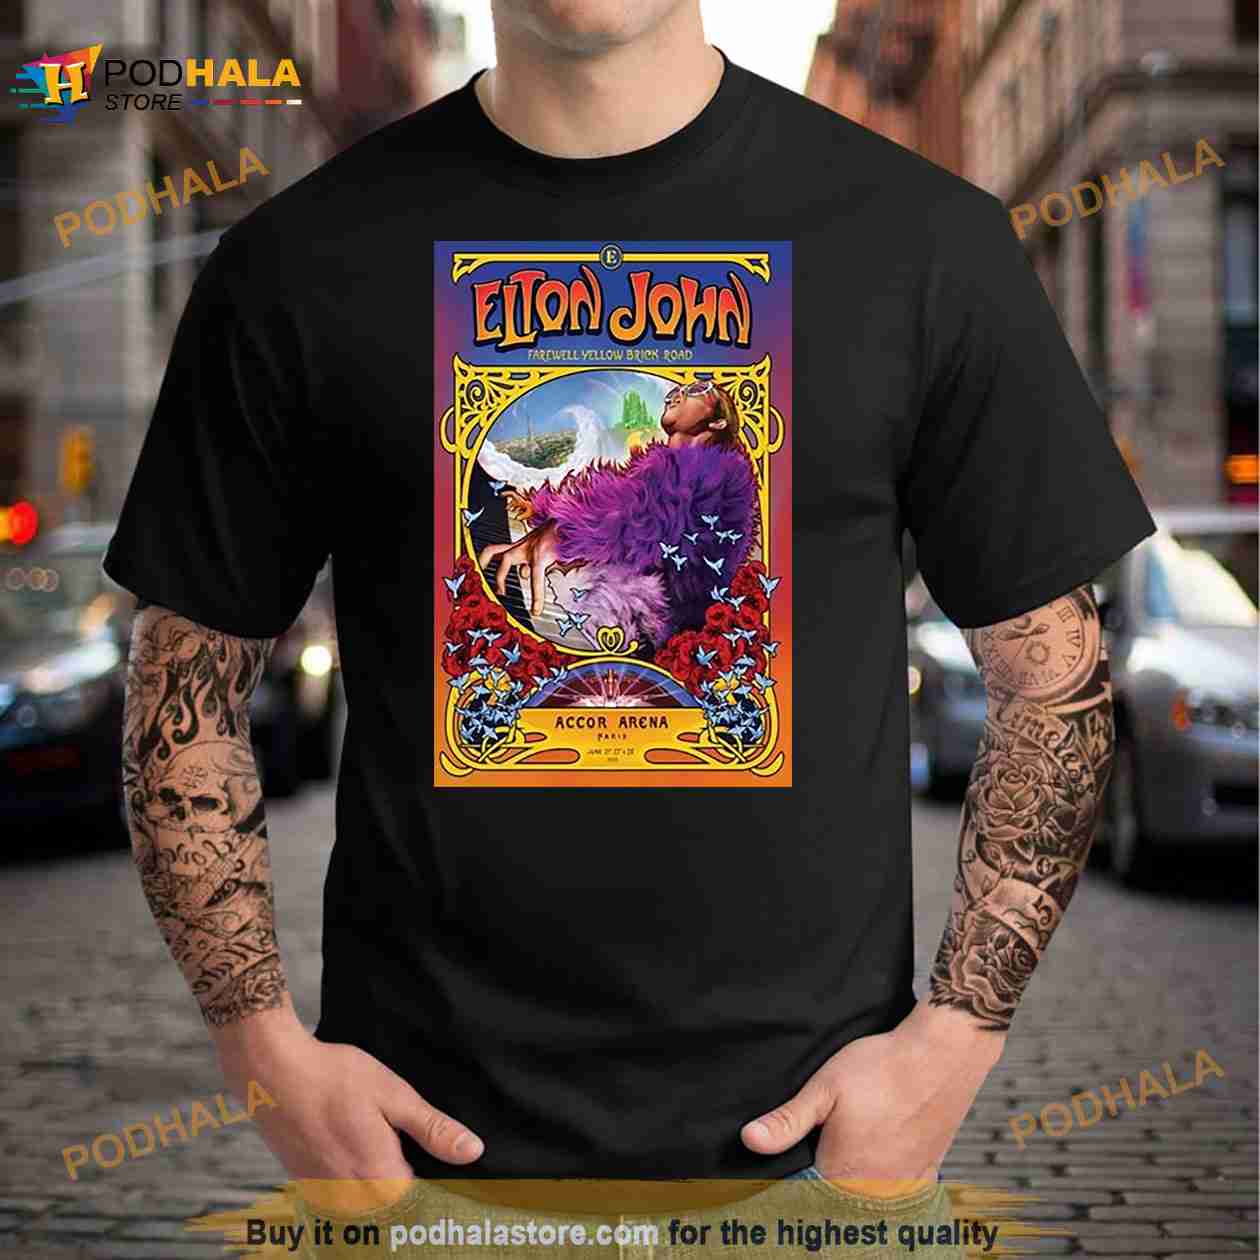 Eltons Johns Shirt Farewell Yellow Brick Road The Final Tour 2022 T-Shirt  for Men Women (Printed Front and Back)